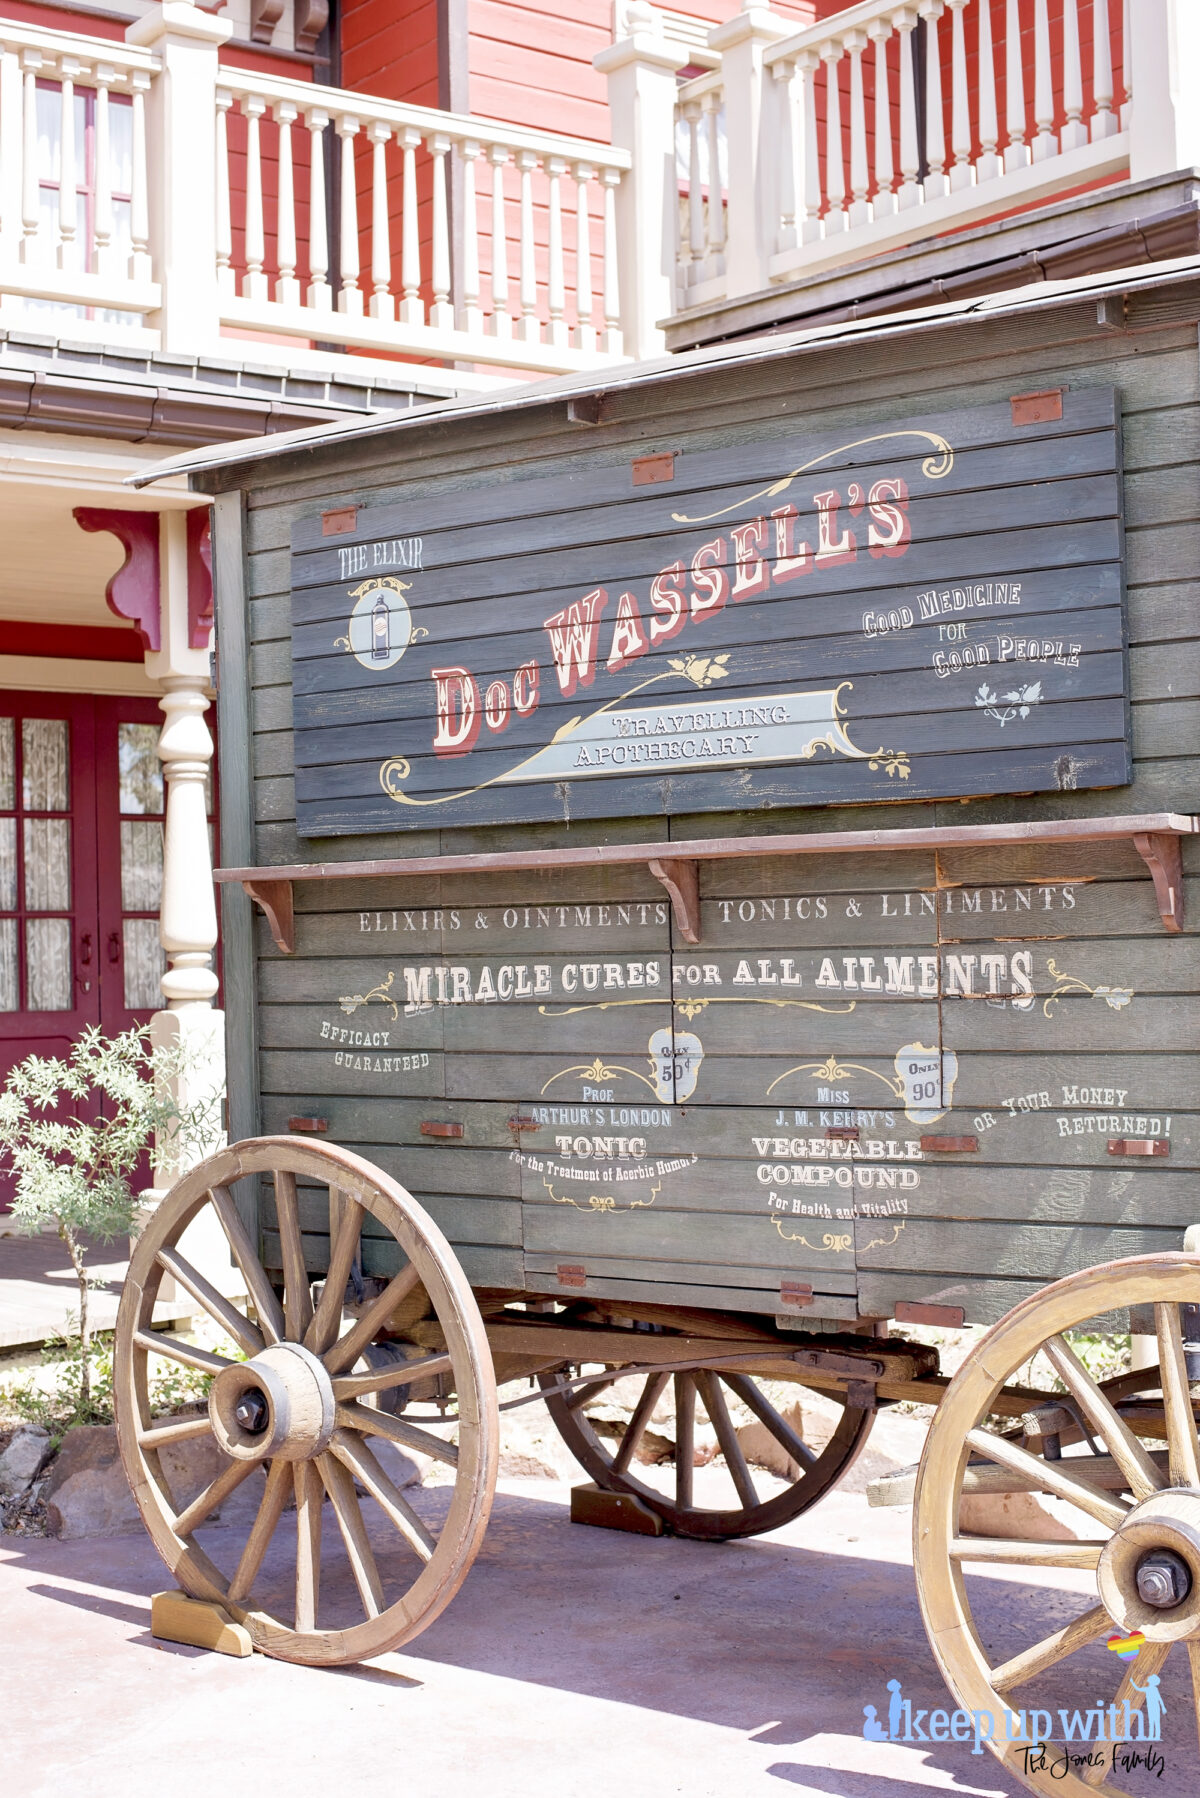 Image showsDoc Wassell's Miracle Cures for All Ailments caravan in Frontierland outside the Disneyland Paris Spirit Photography Booth where you can print a personalised copy of the Mysterious Chronicle by Phantom Manor. Image by Keep Up  With The Jones Family.